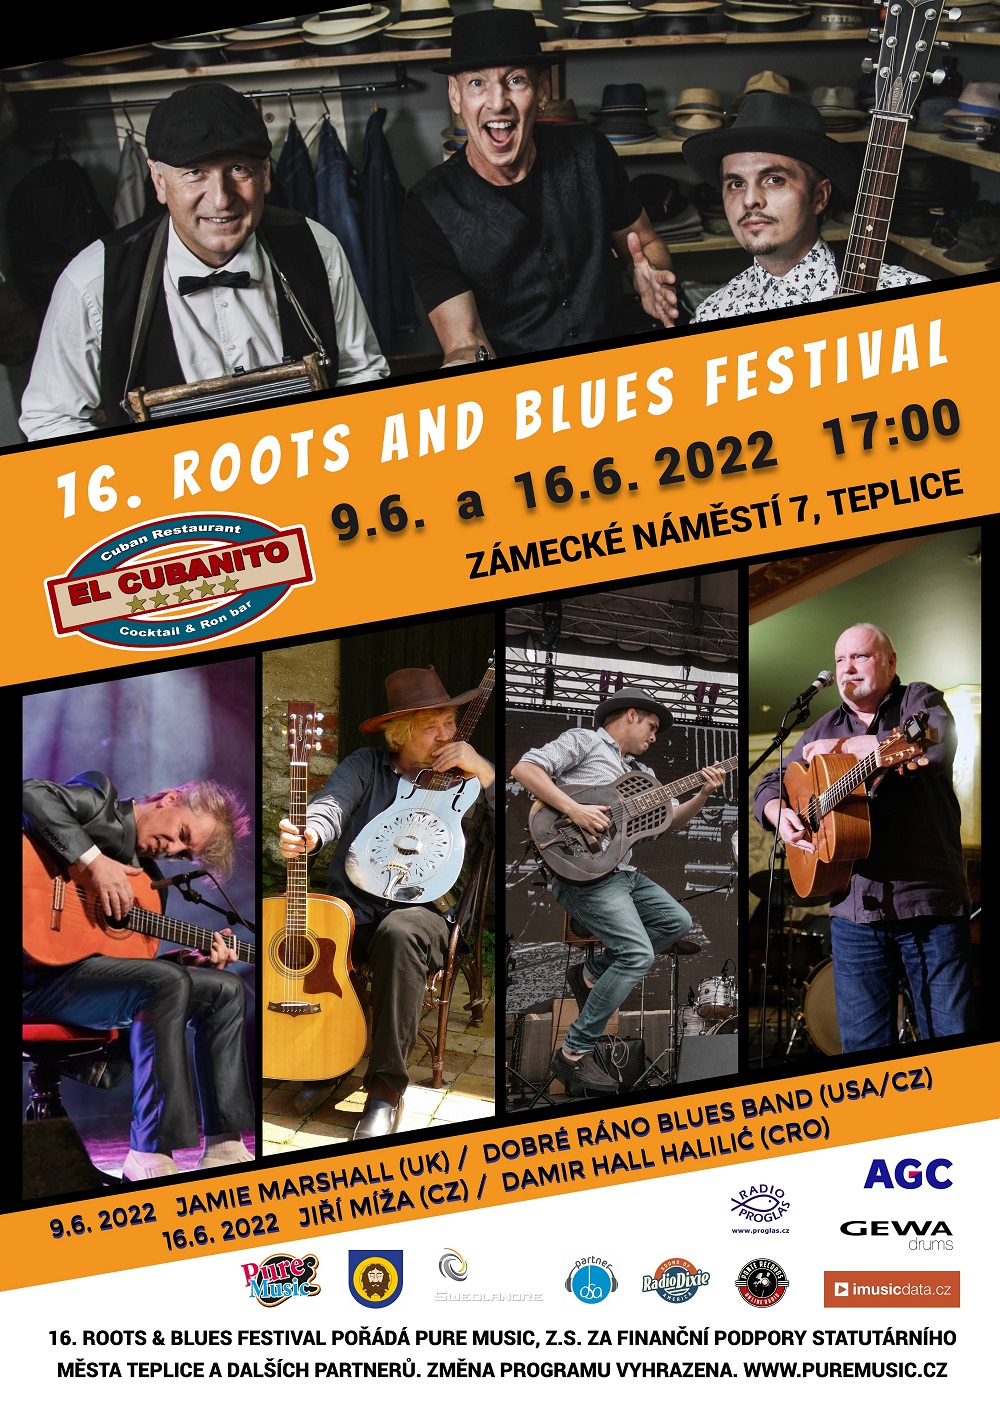 Roots & Blues Festival Teplice 2022